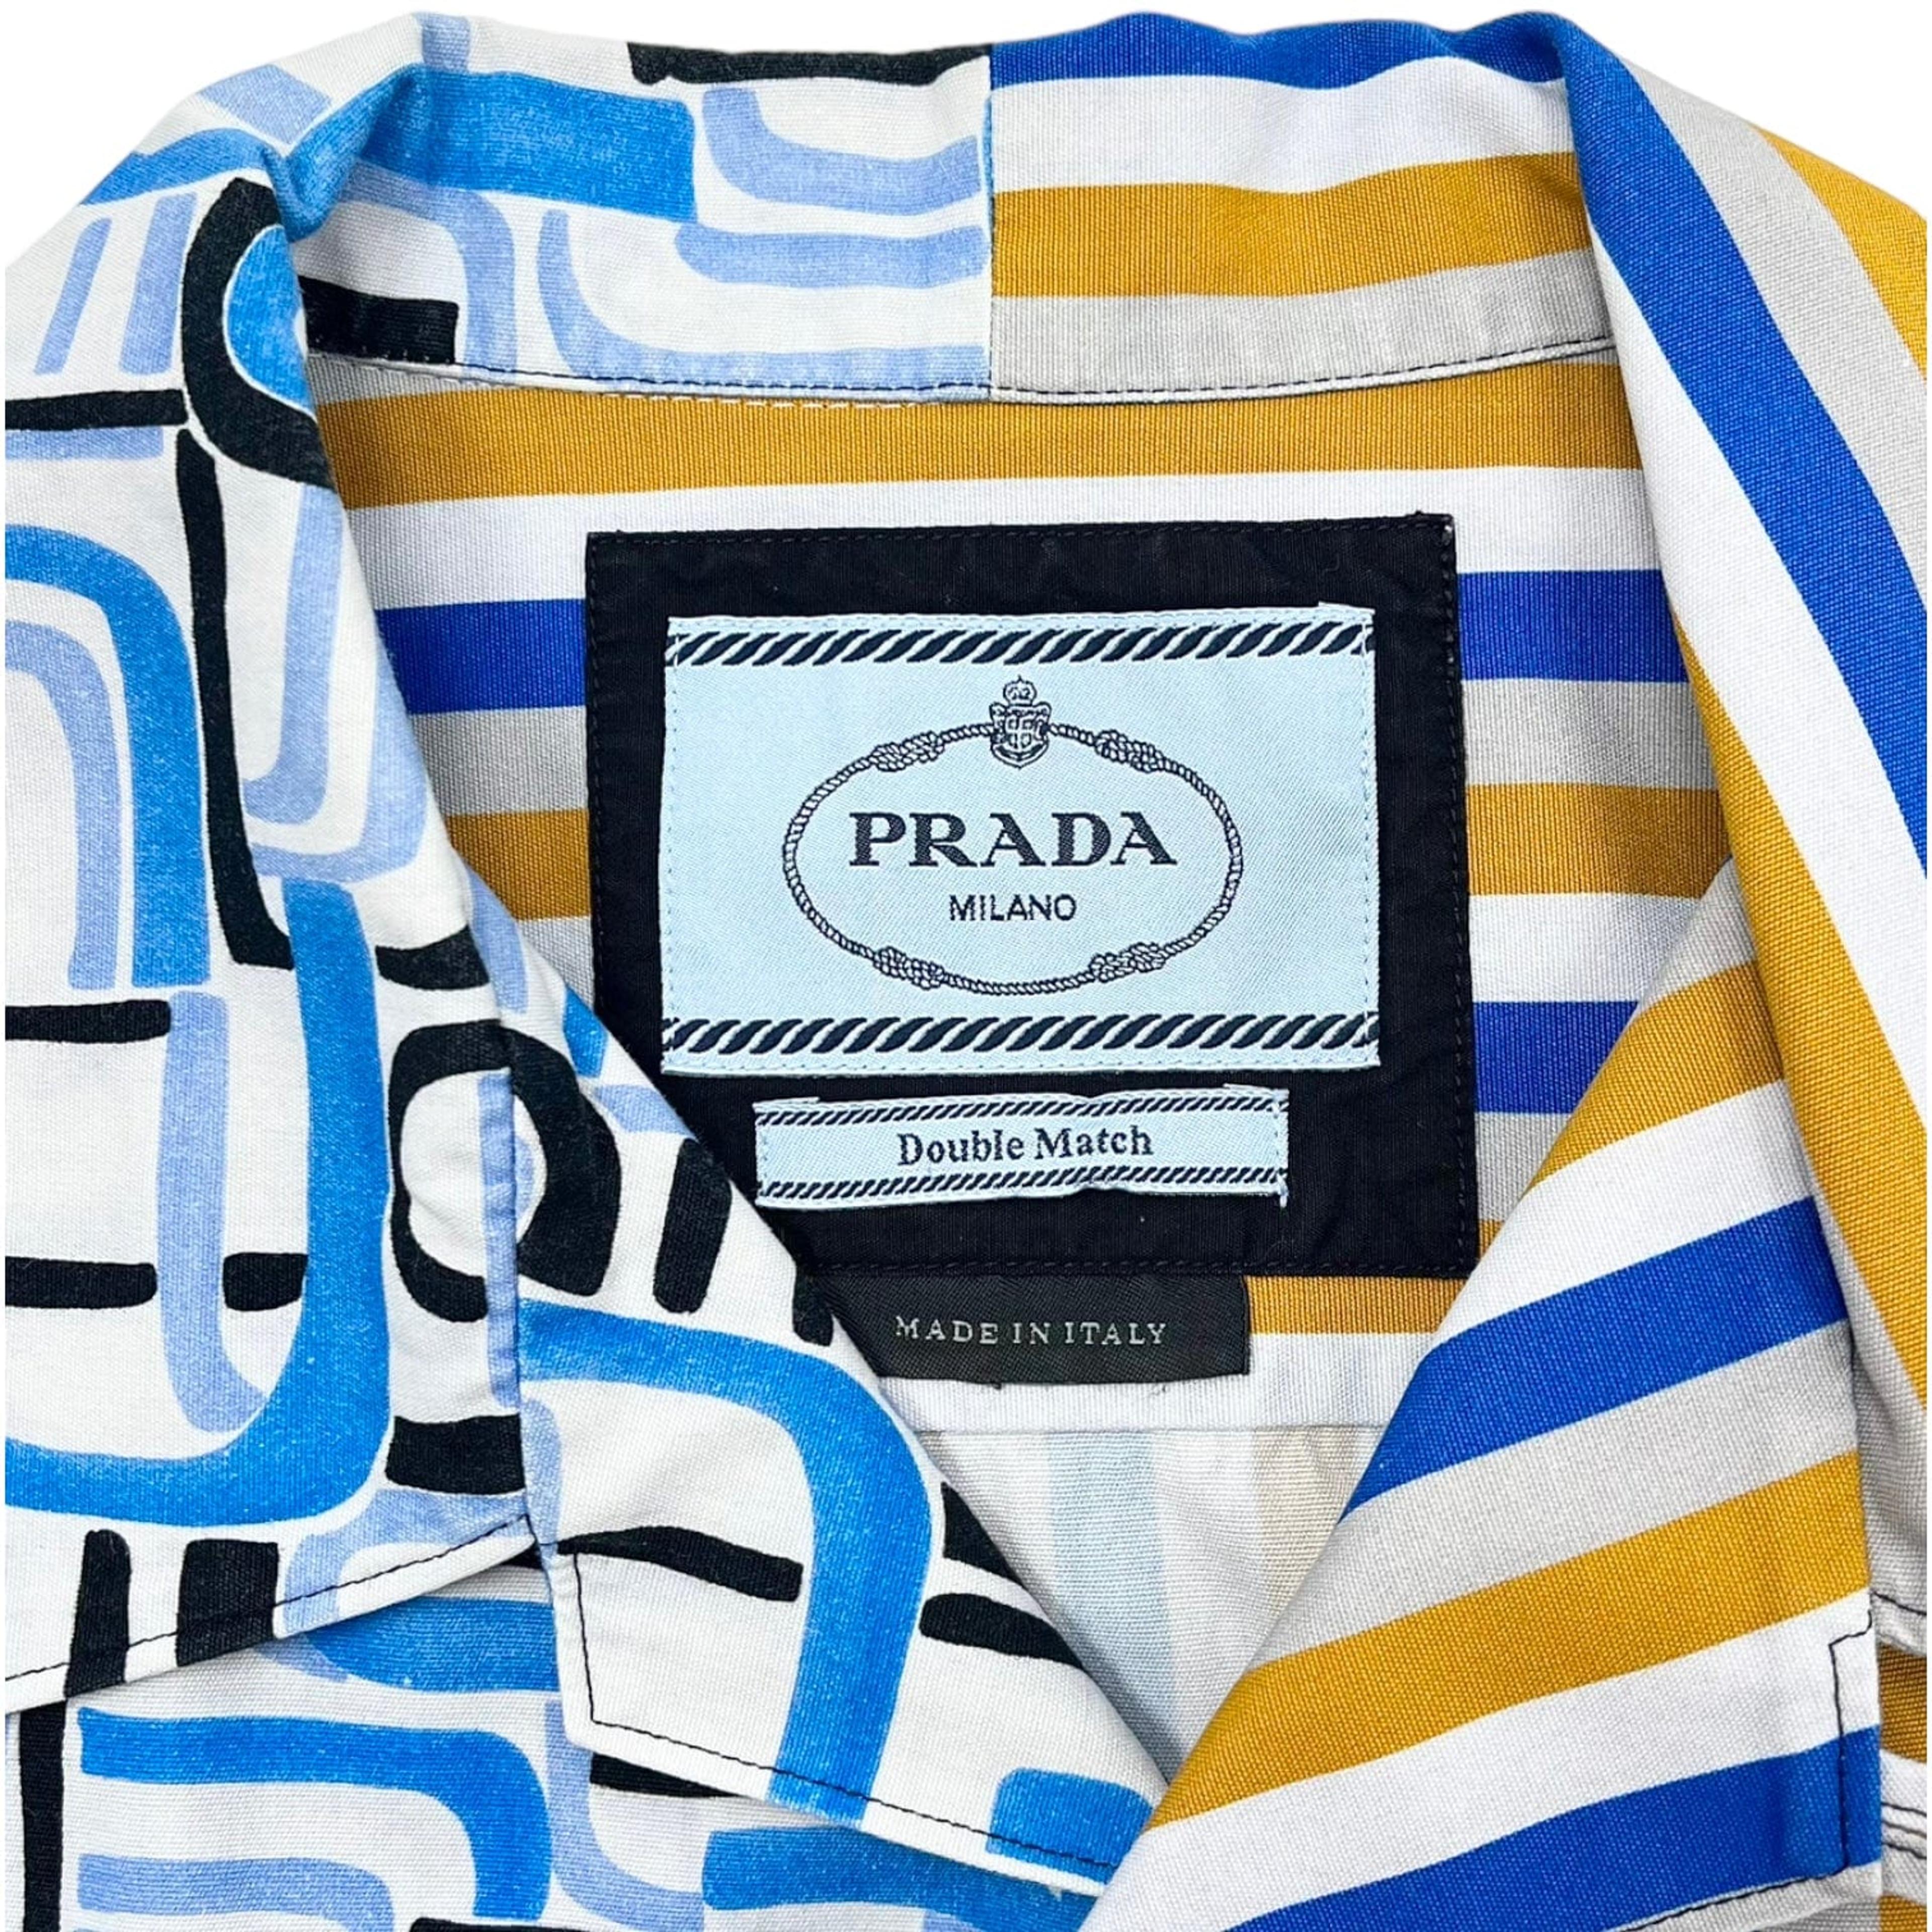 Alternate View 2 of Prada Double Match Bowling Button Up Shirt Stripe Blue Pre-Owned